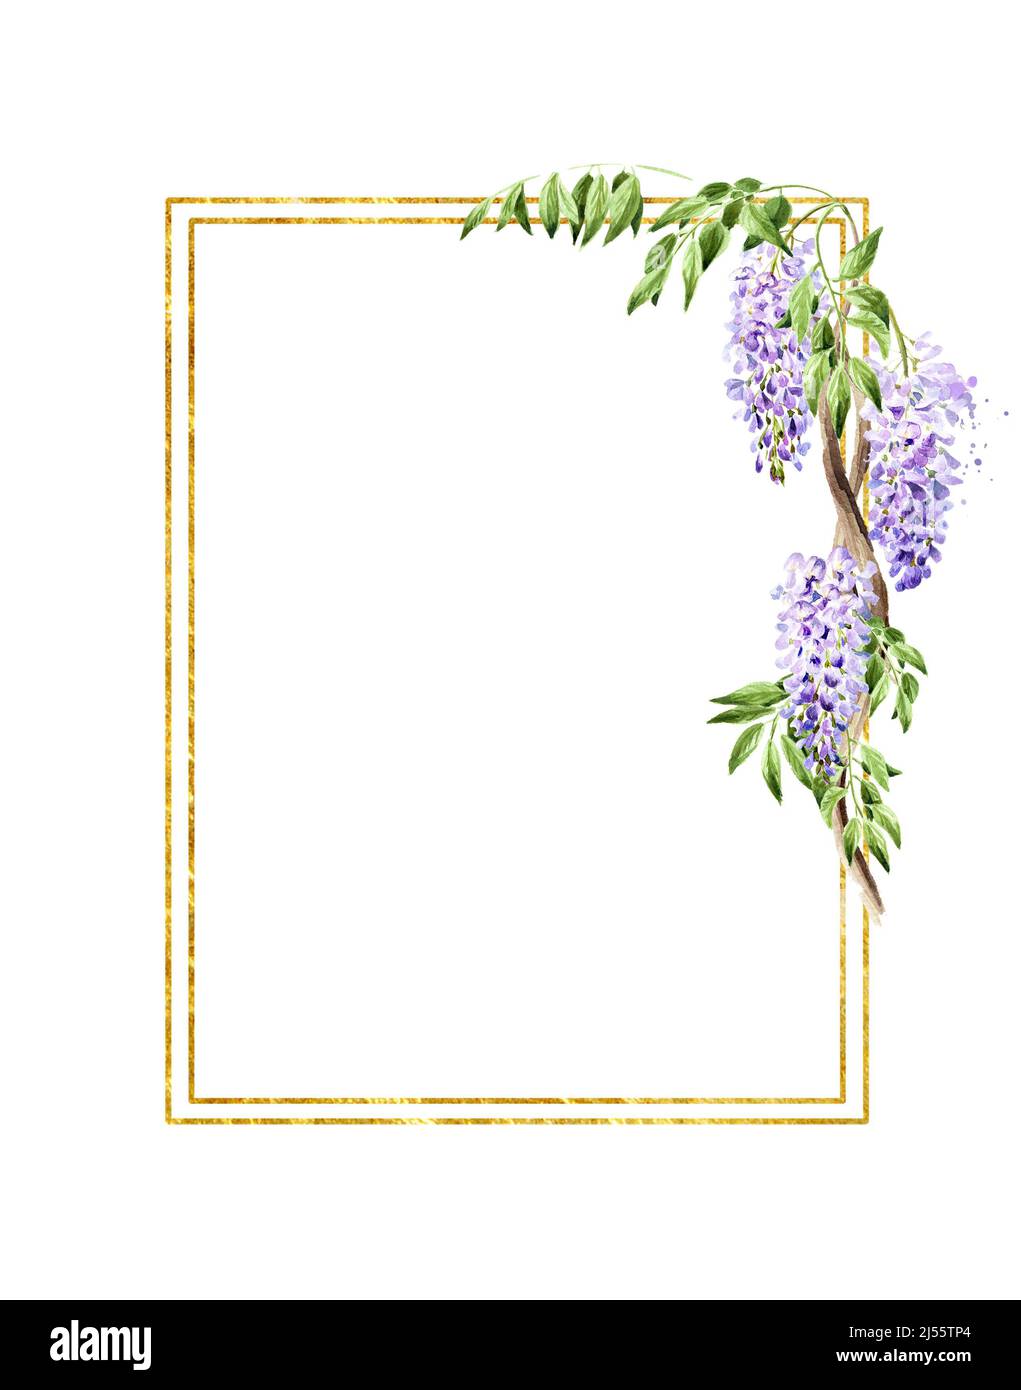 Wisteria flower card,  Hand drawn watercolor illustration, isolated on white background Stock Photo